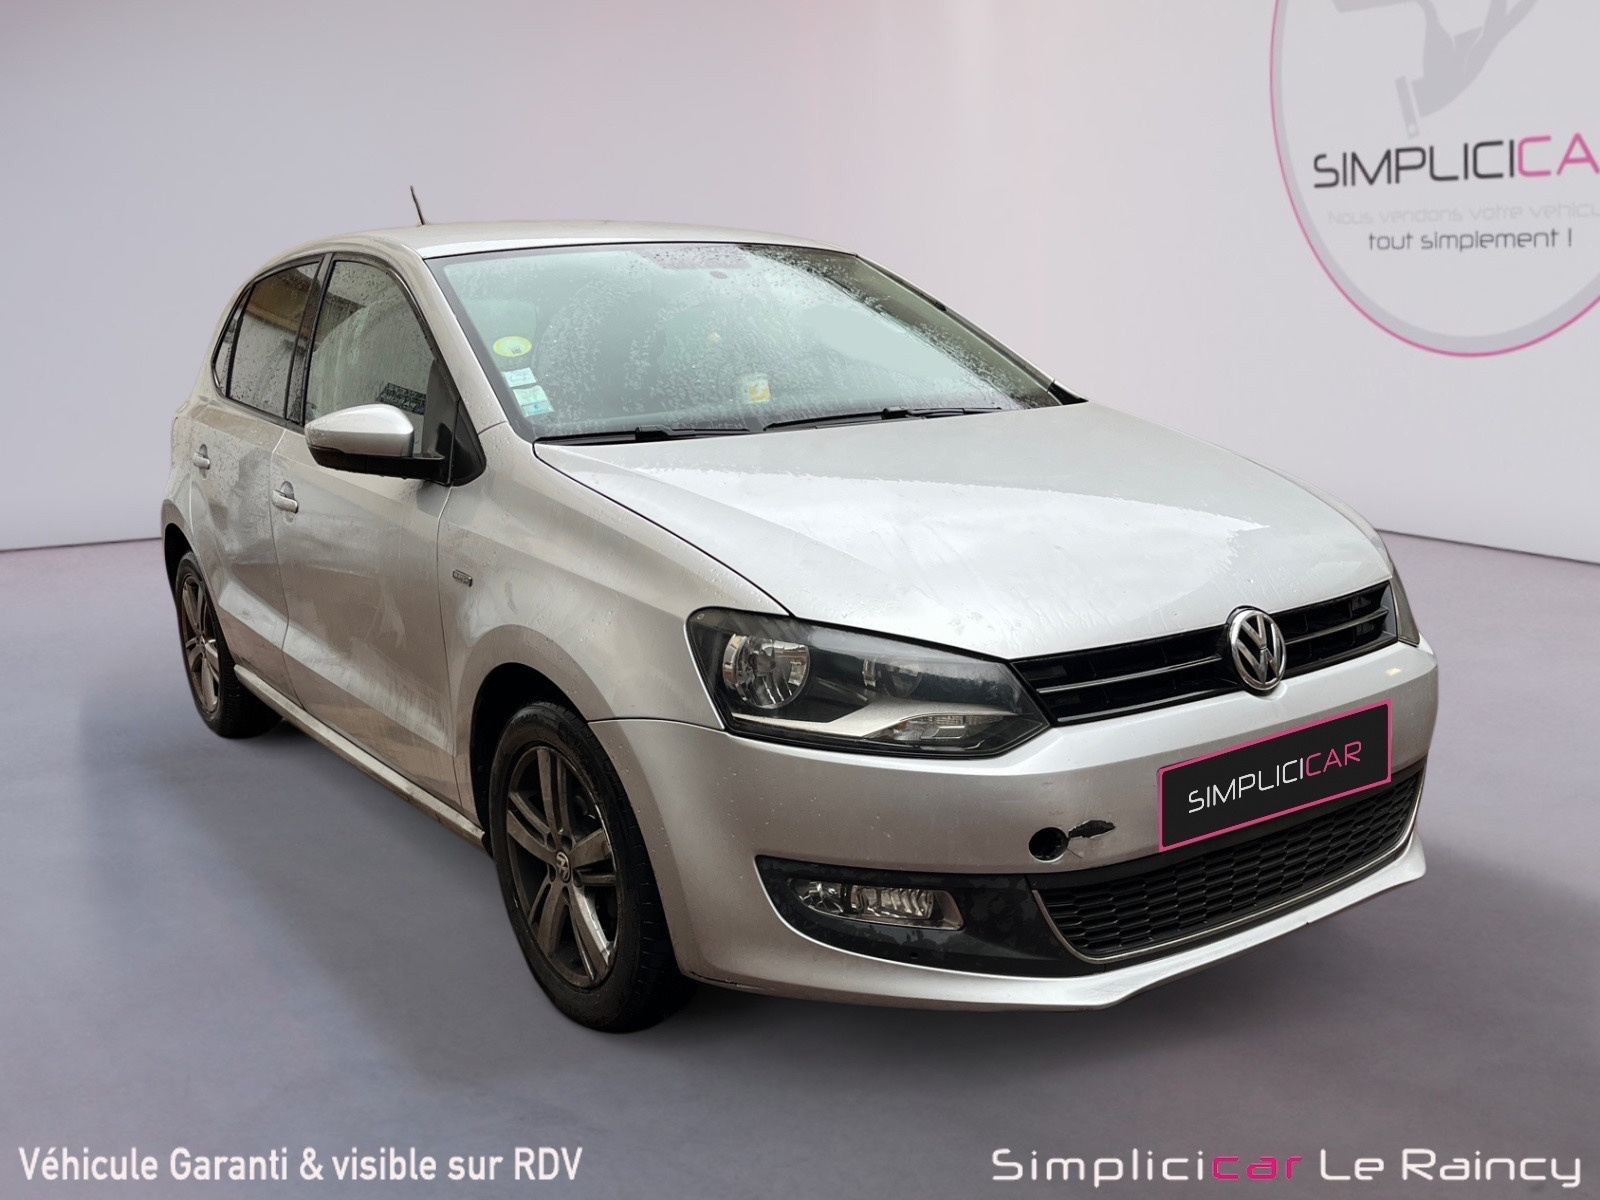 VOLKSWAGEN POLO vw-polo-9n-1-4tdi-modified occasion - Le Parking